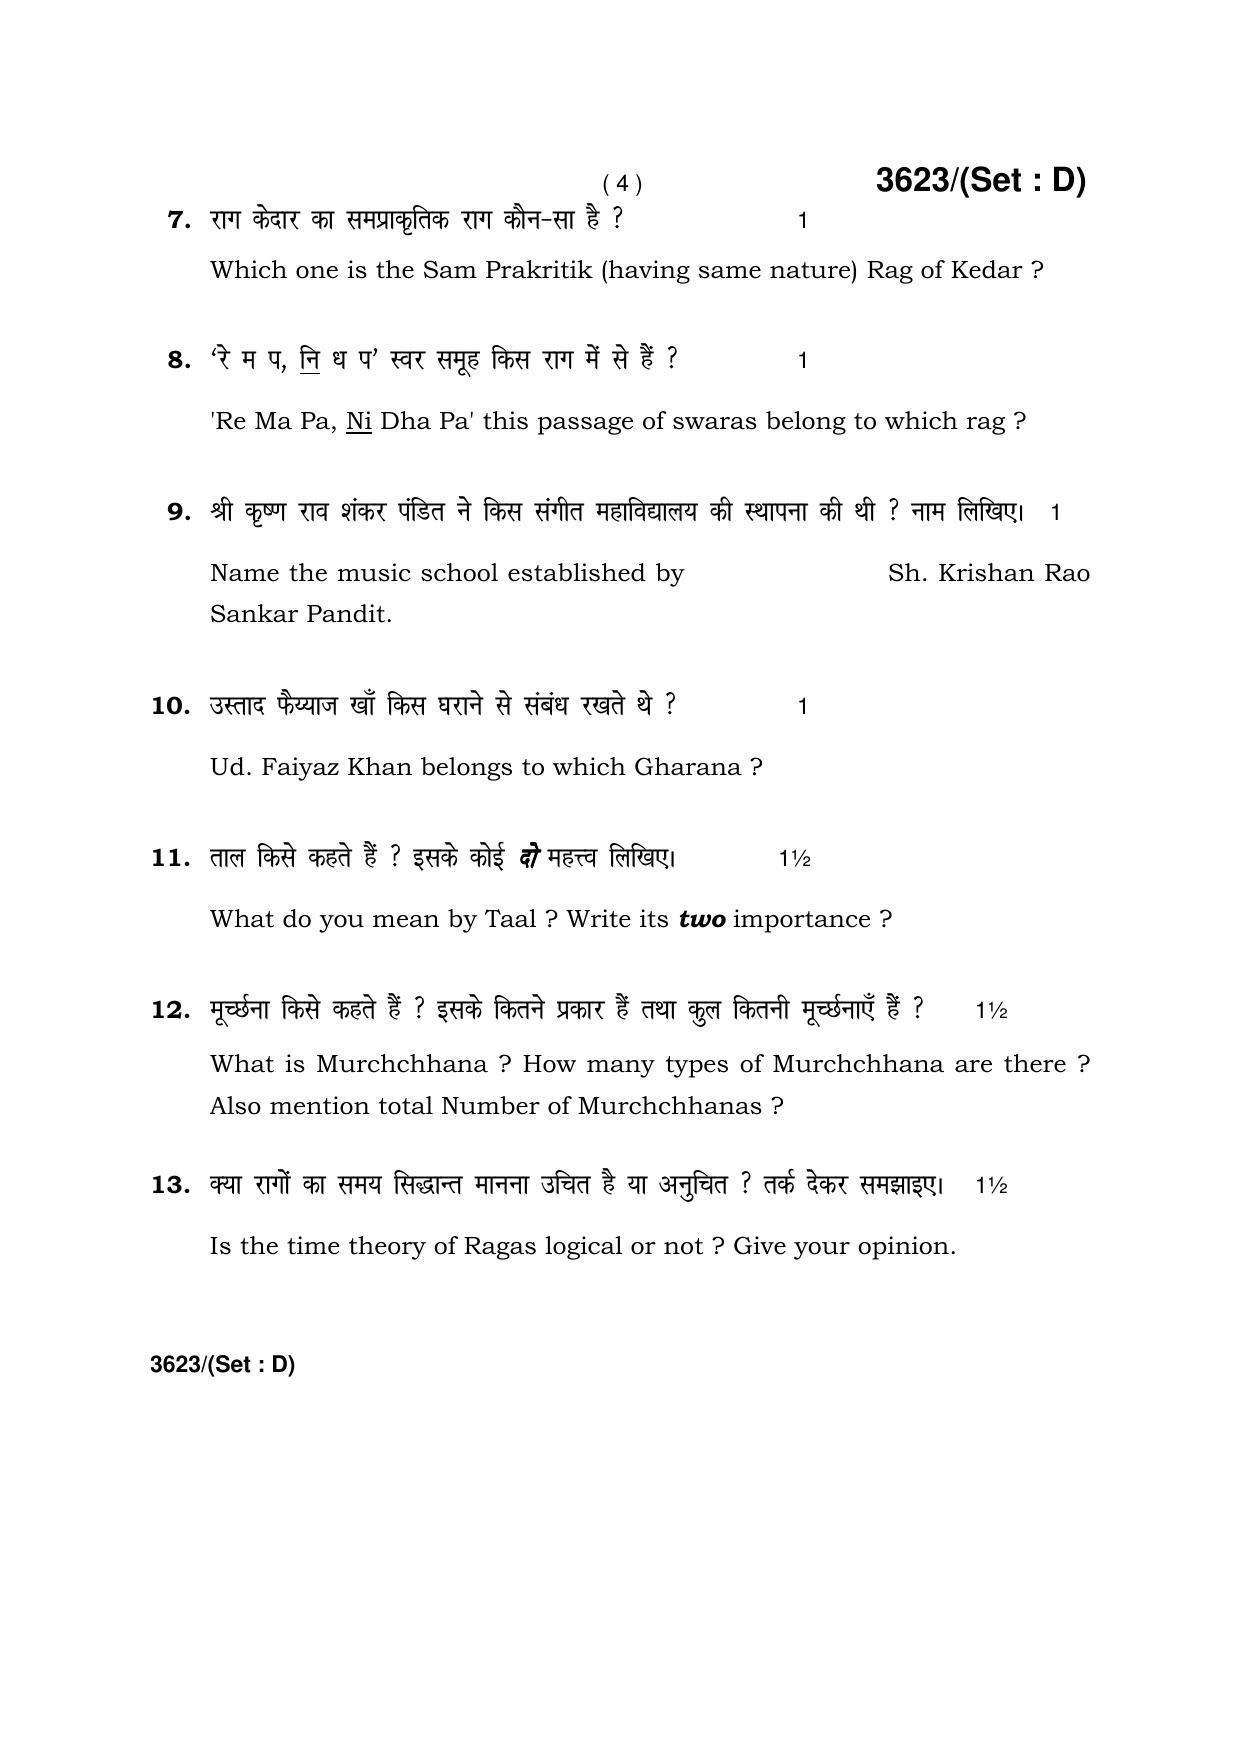 Haryana Board HBSE Class 12 Music Hindustani (Vocal) -D 2018 Question Paper - Page 4